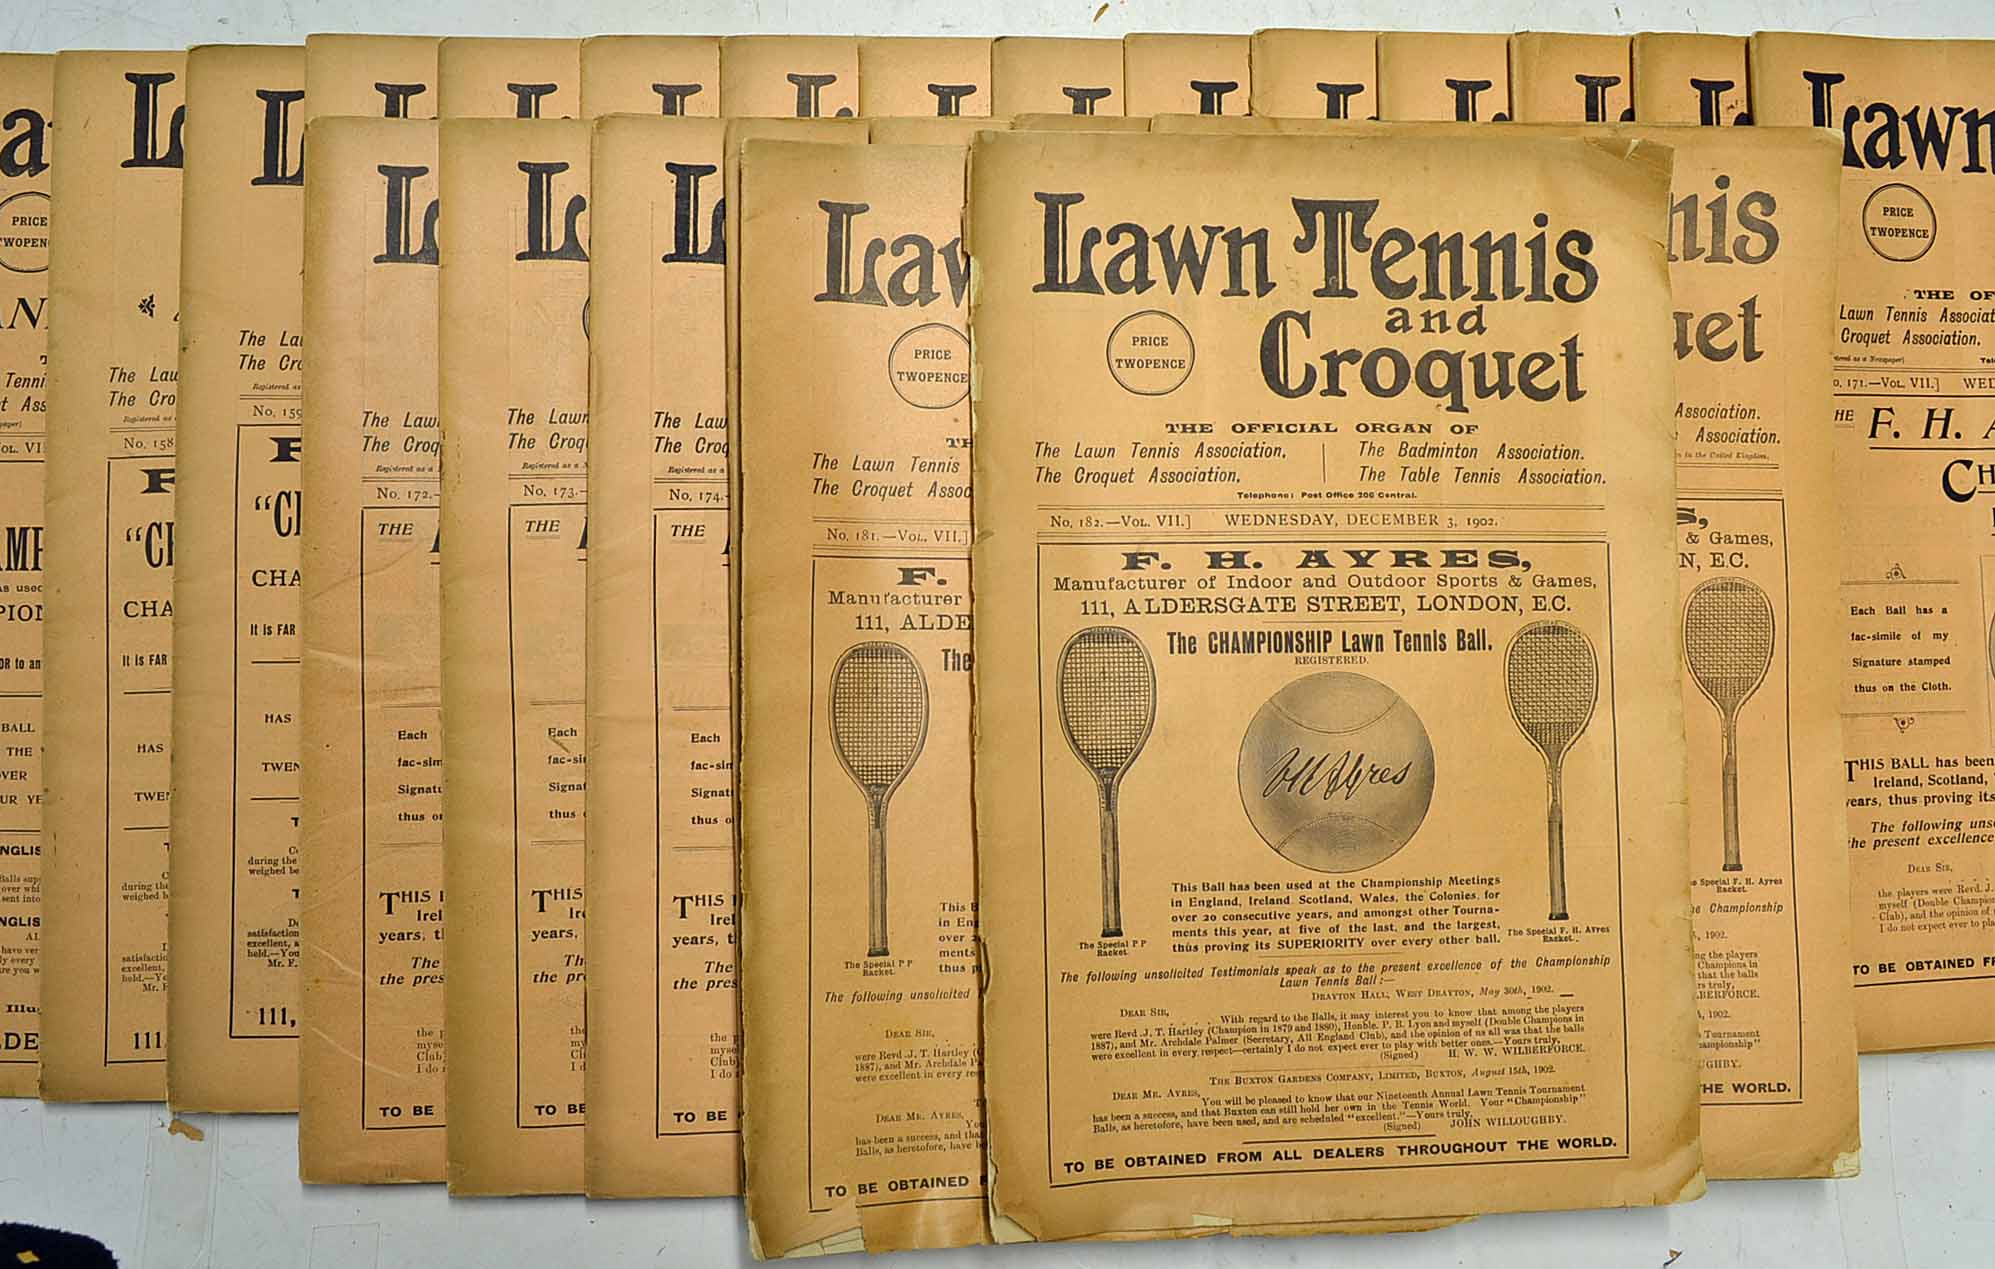 Rare and early 1902 Lawn Tennis and Croquet magazines – to incl Vol. VI I no 157 April 23rd 1902